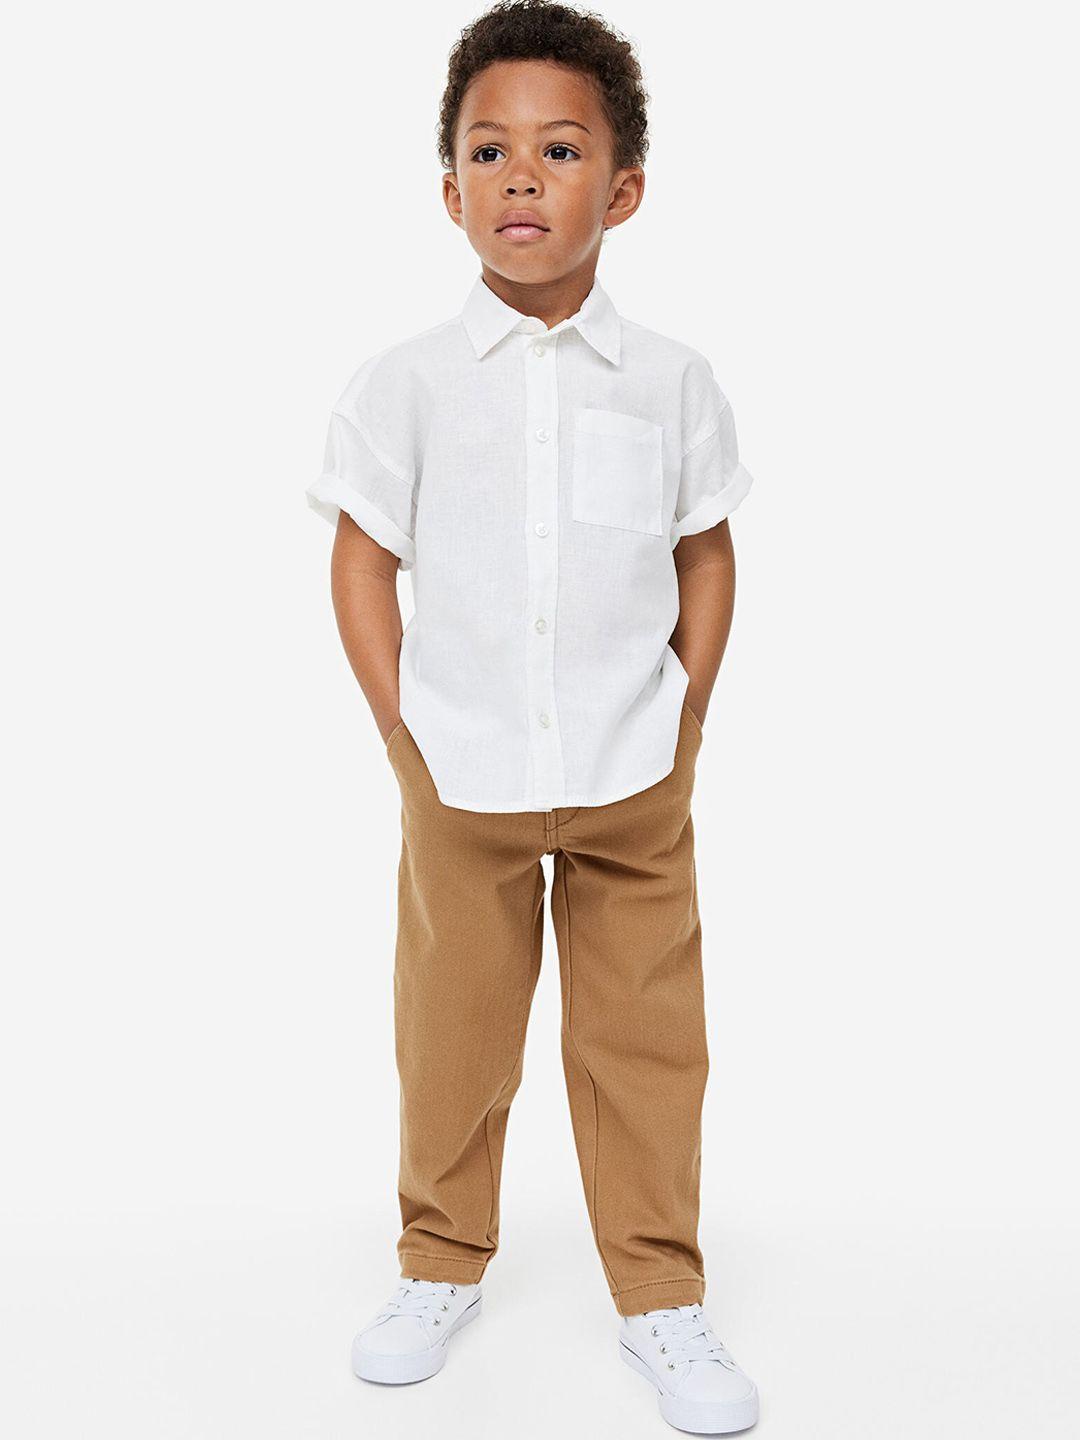 H&M Boys Relaxed Fit Twill Chinos